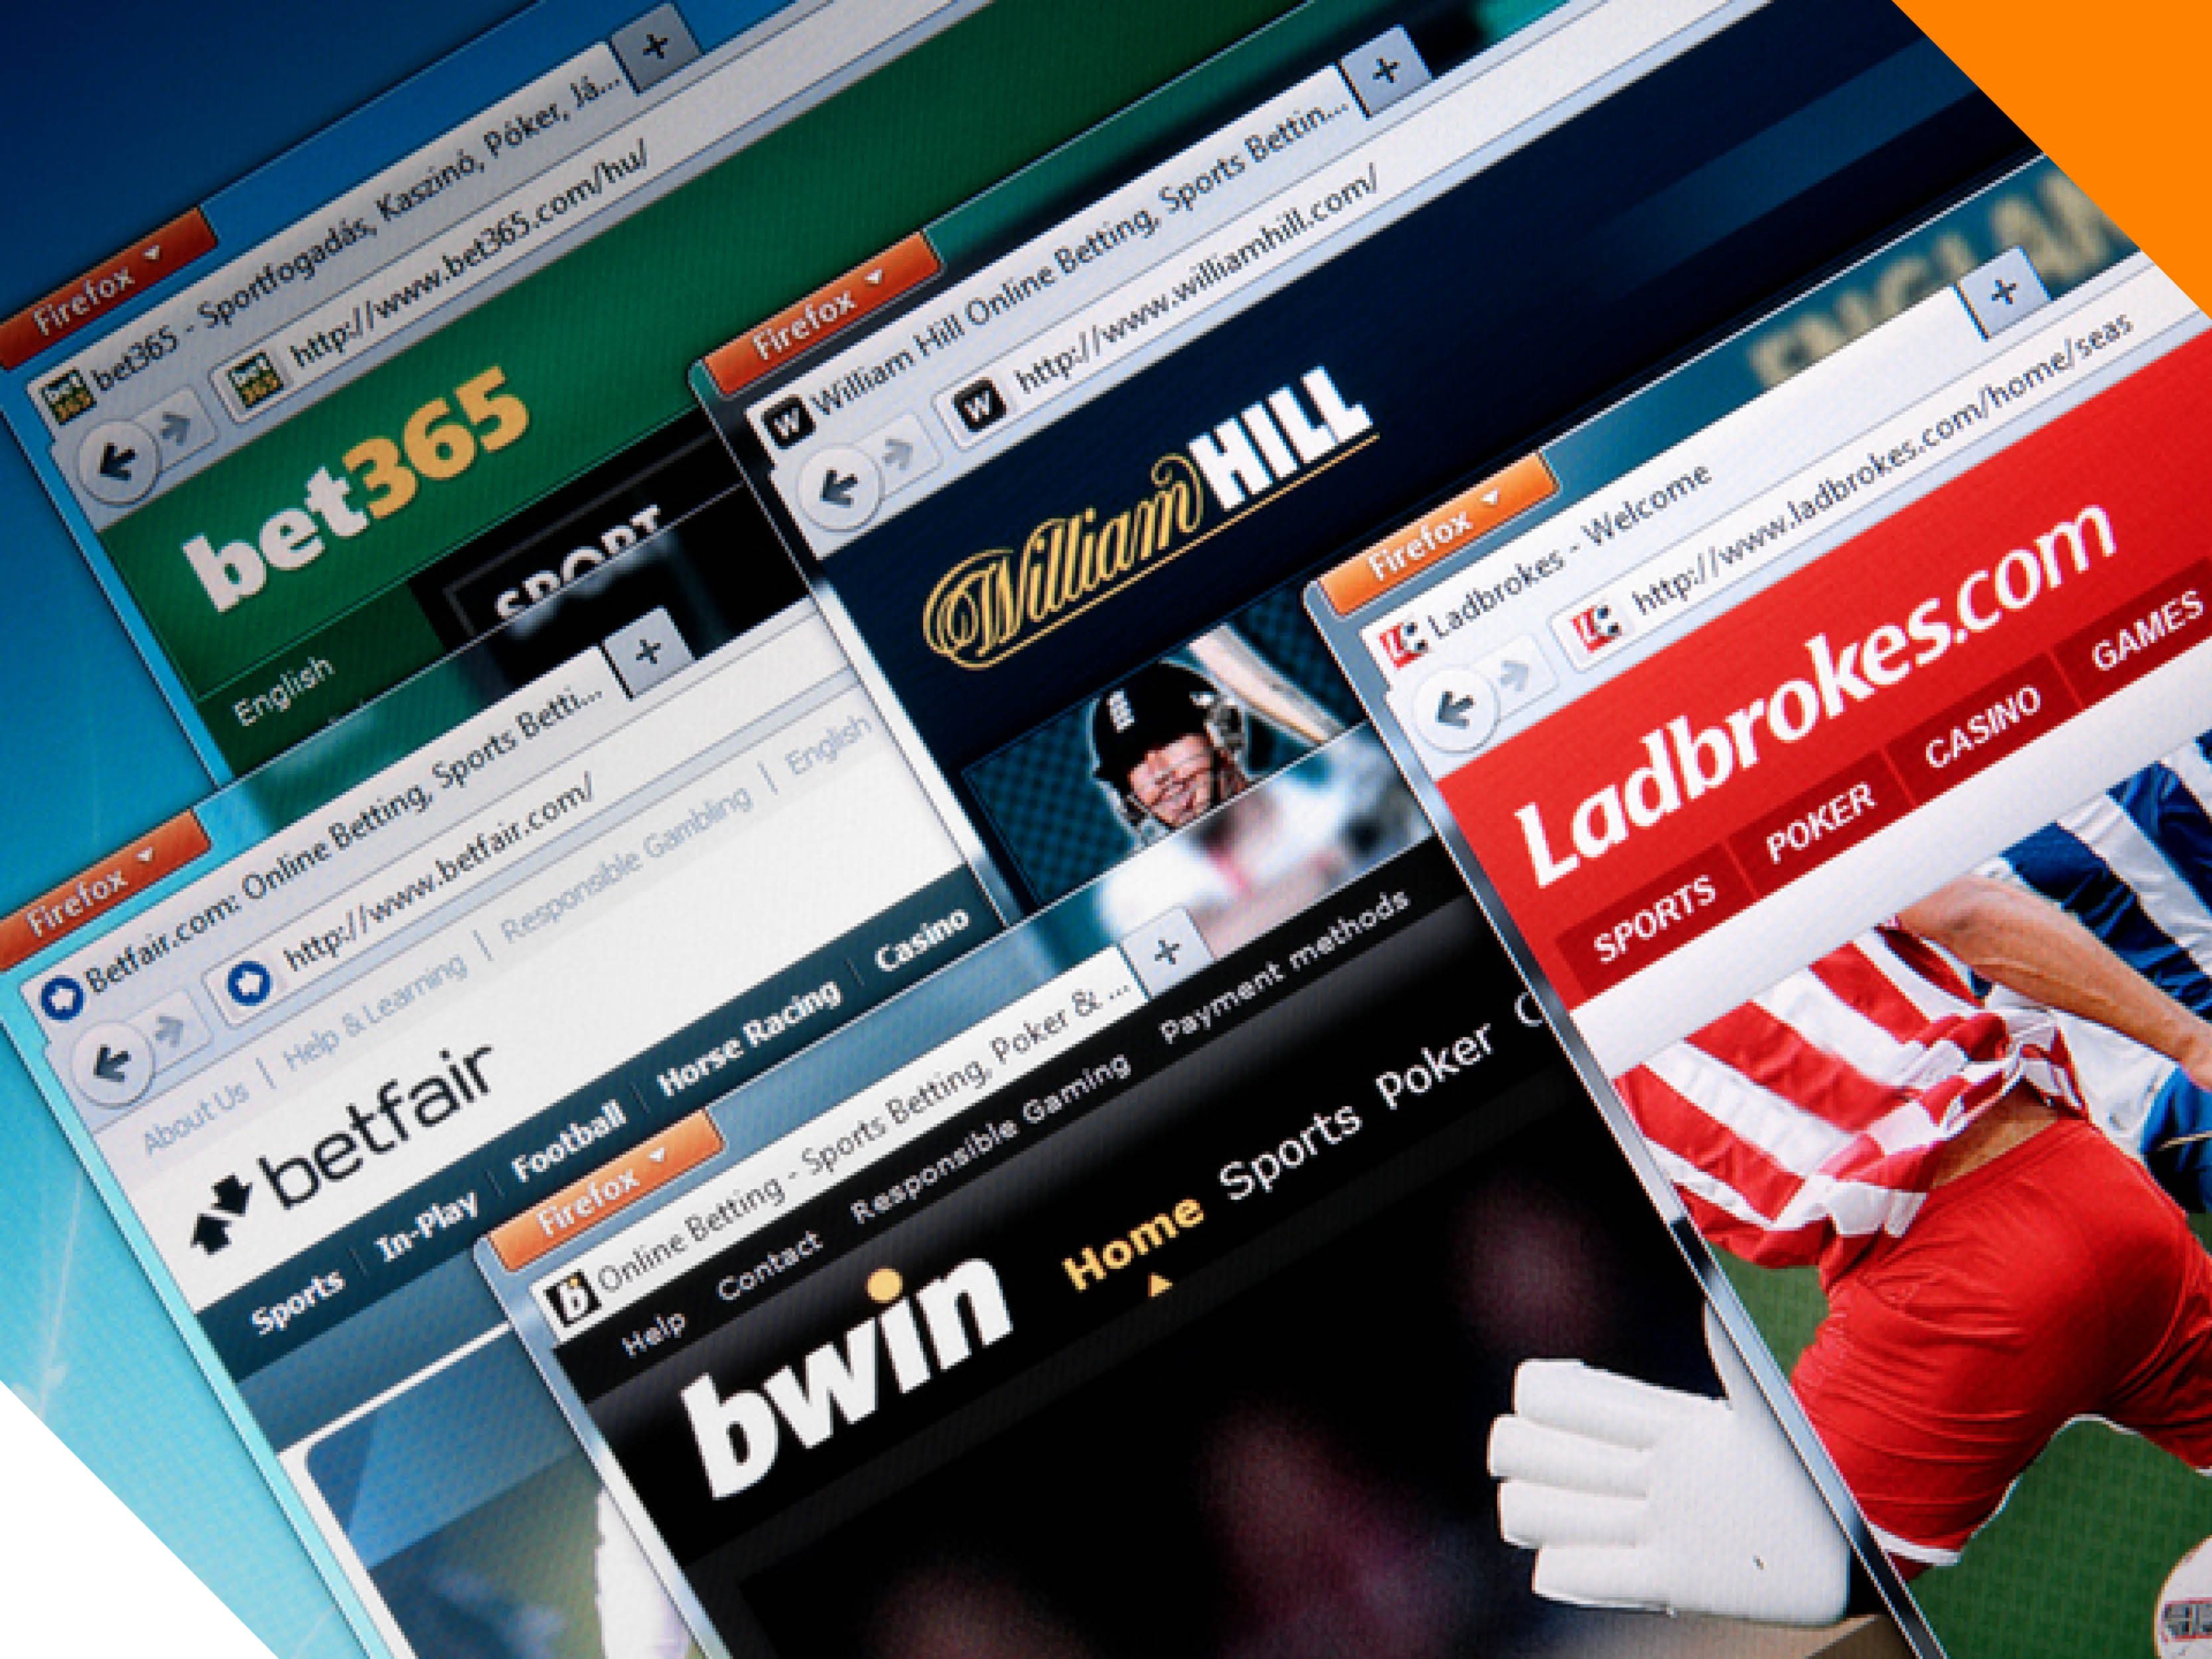 Bet securely with online pro sports betting with e-check service